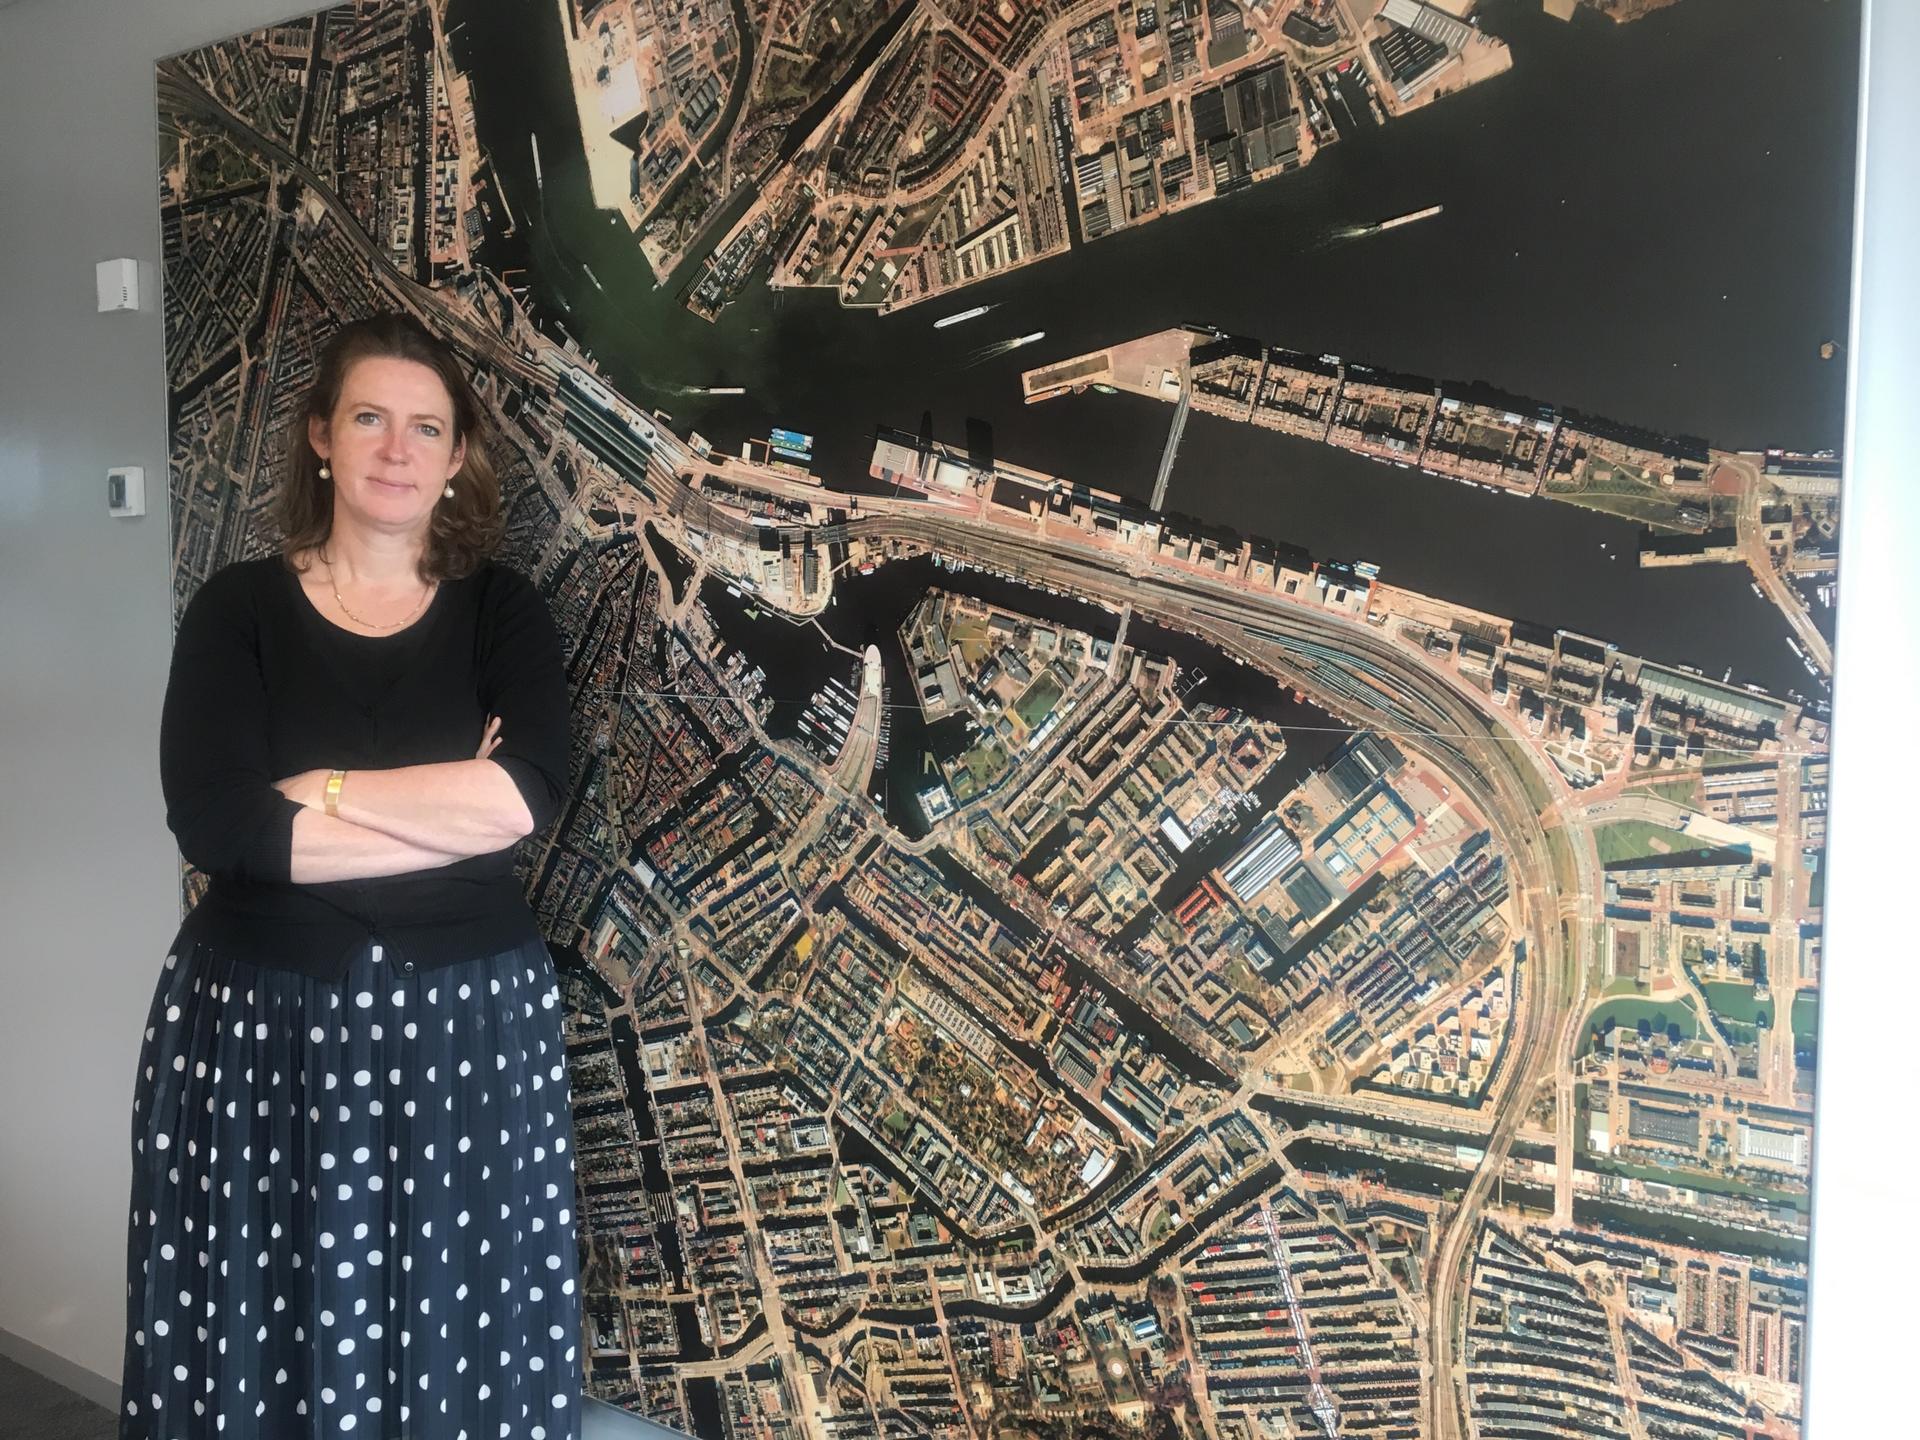 Mascha ten Bruggencate, district governor with the city of Amsterdam